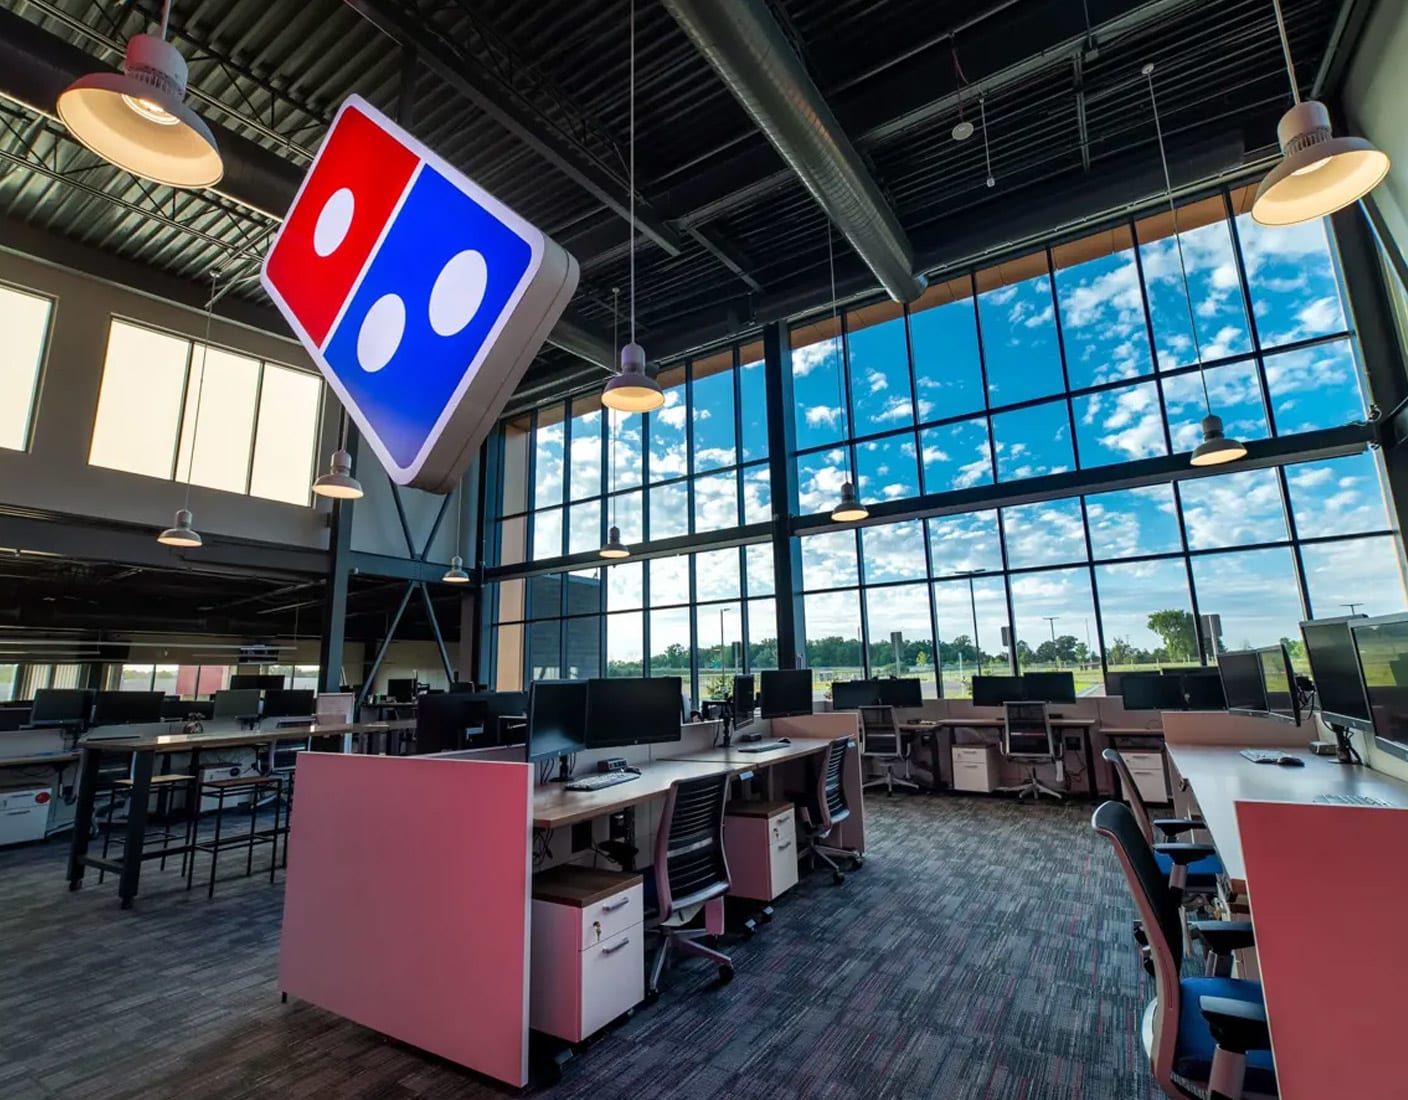 Photo of the inside of Domino's Pizza restaurant